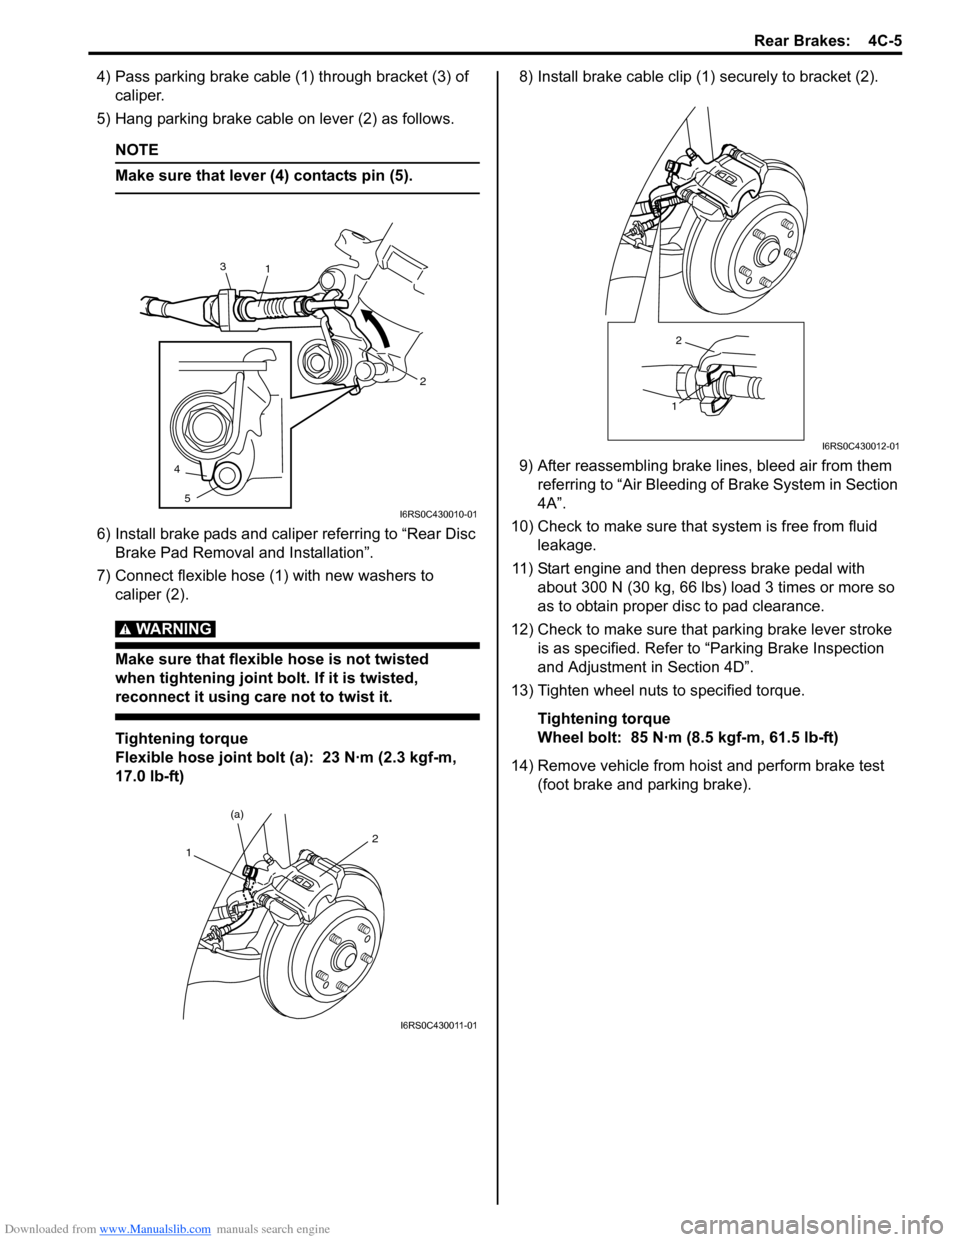 SUZUKI SWIFT 2008 2.G Service Workshop Manual Downloaded from www.Manualslib.com manuals search engine Rear Brakes:  4C-5
4) Pass parking brake cable (1) through bracket (3) of caliper.
5) Hang parking brake cable on lever (2) as follows.
NOTE
Ma